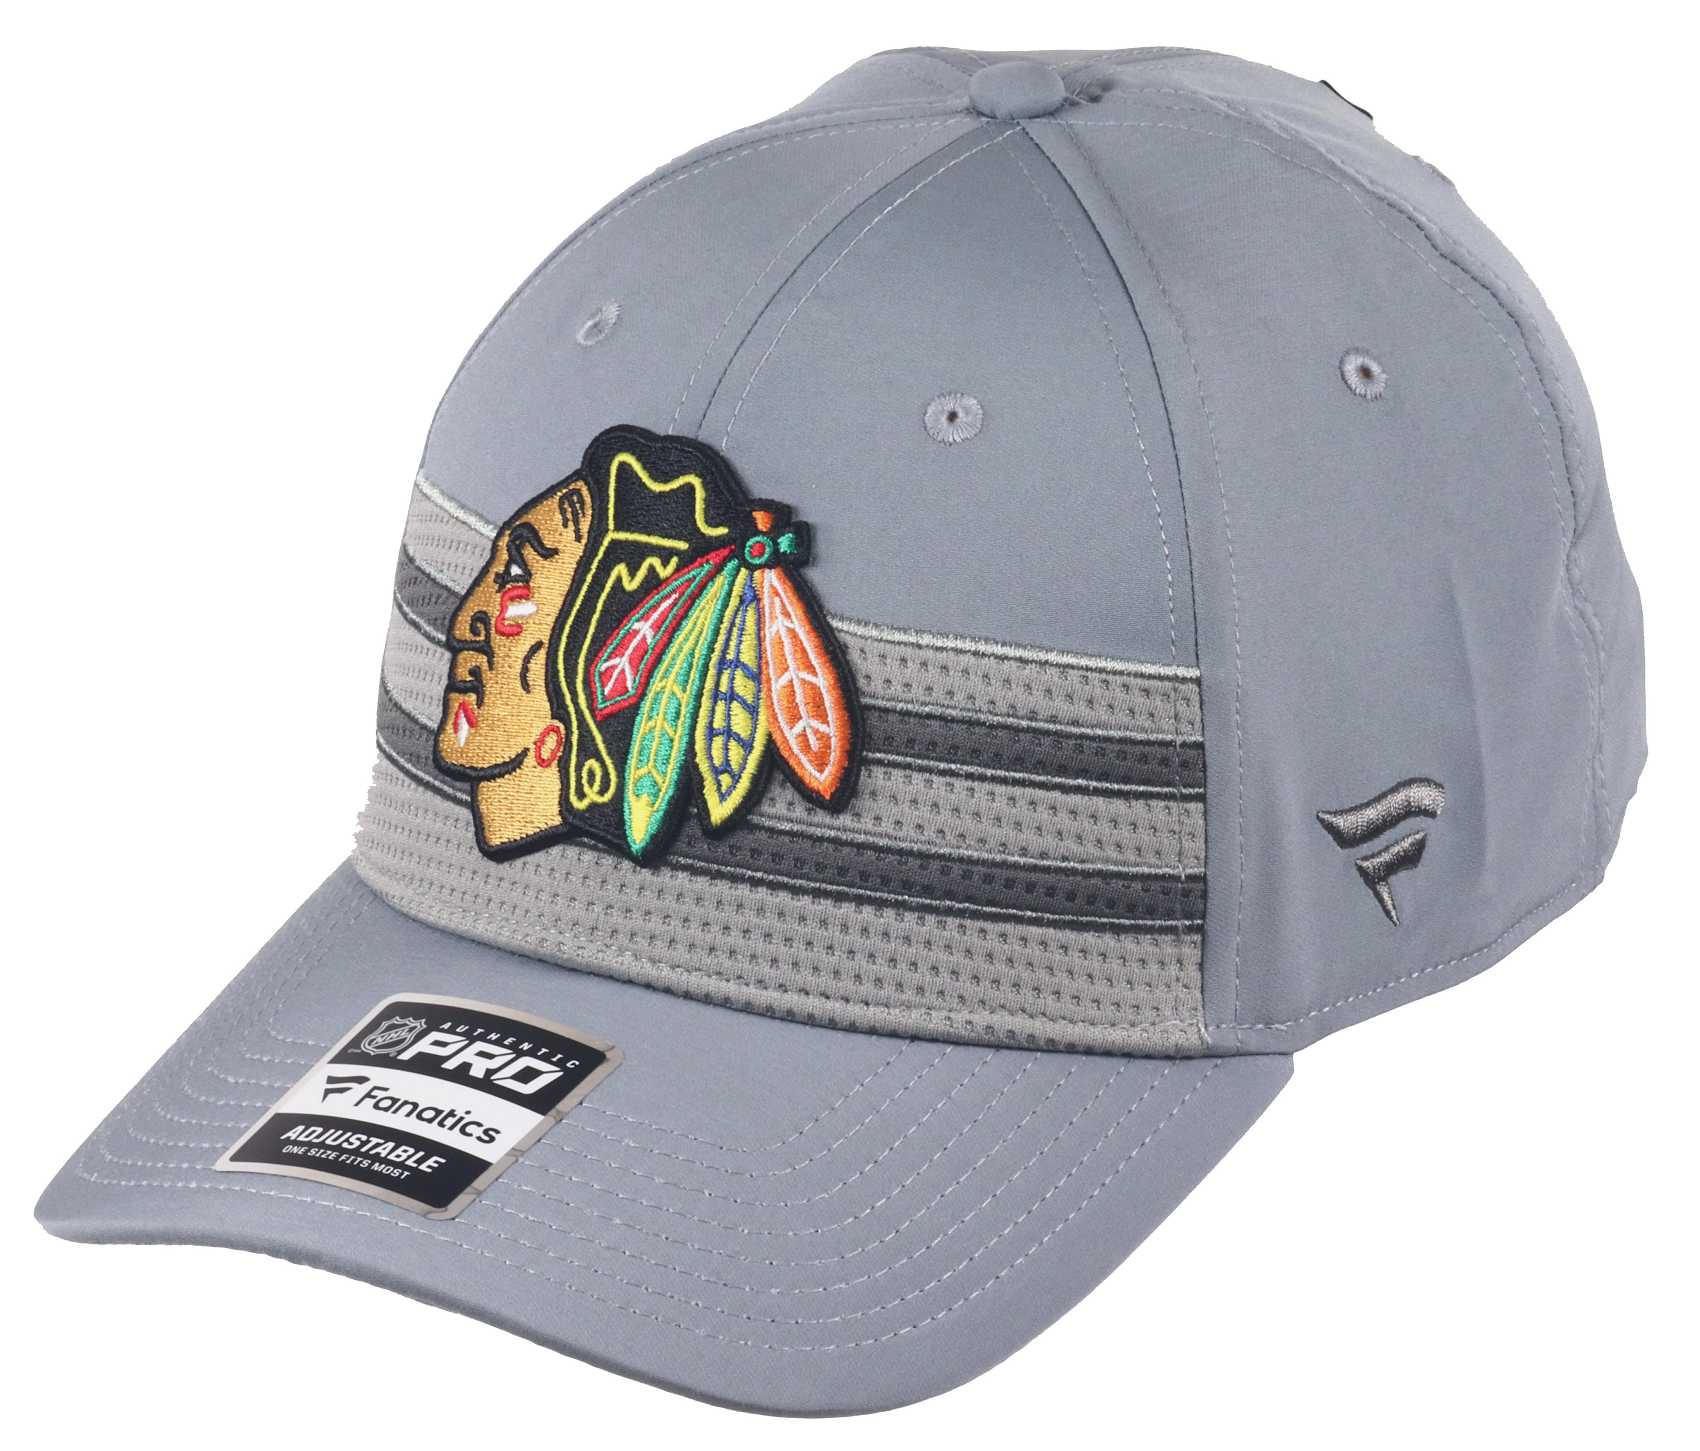 Chicago Blackhawks NHL Authentic Pro Home Ice Structured Curved Snapback Cap Grey Fanatics